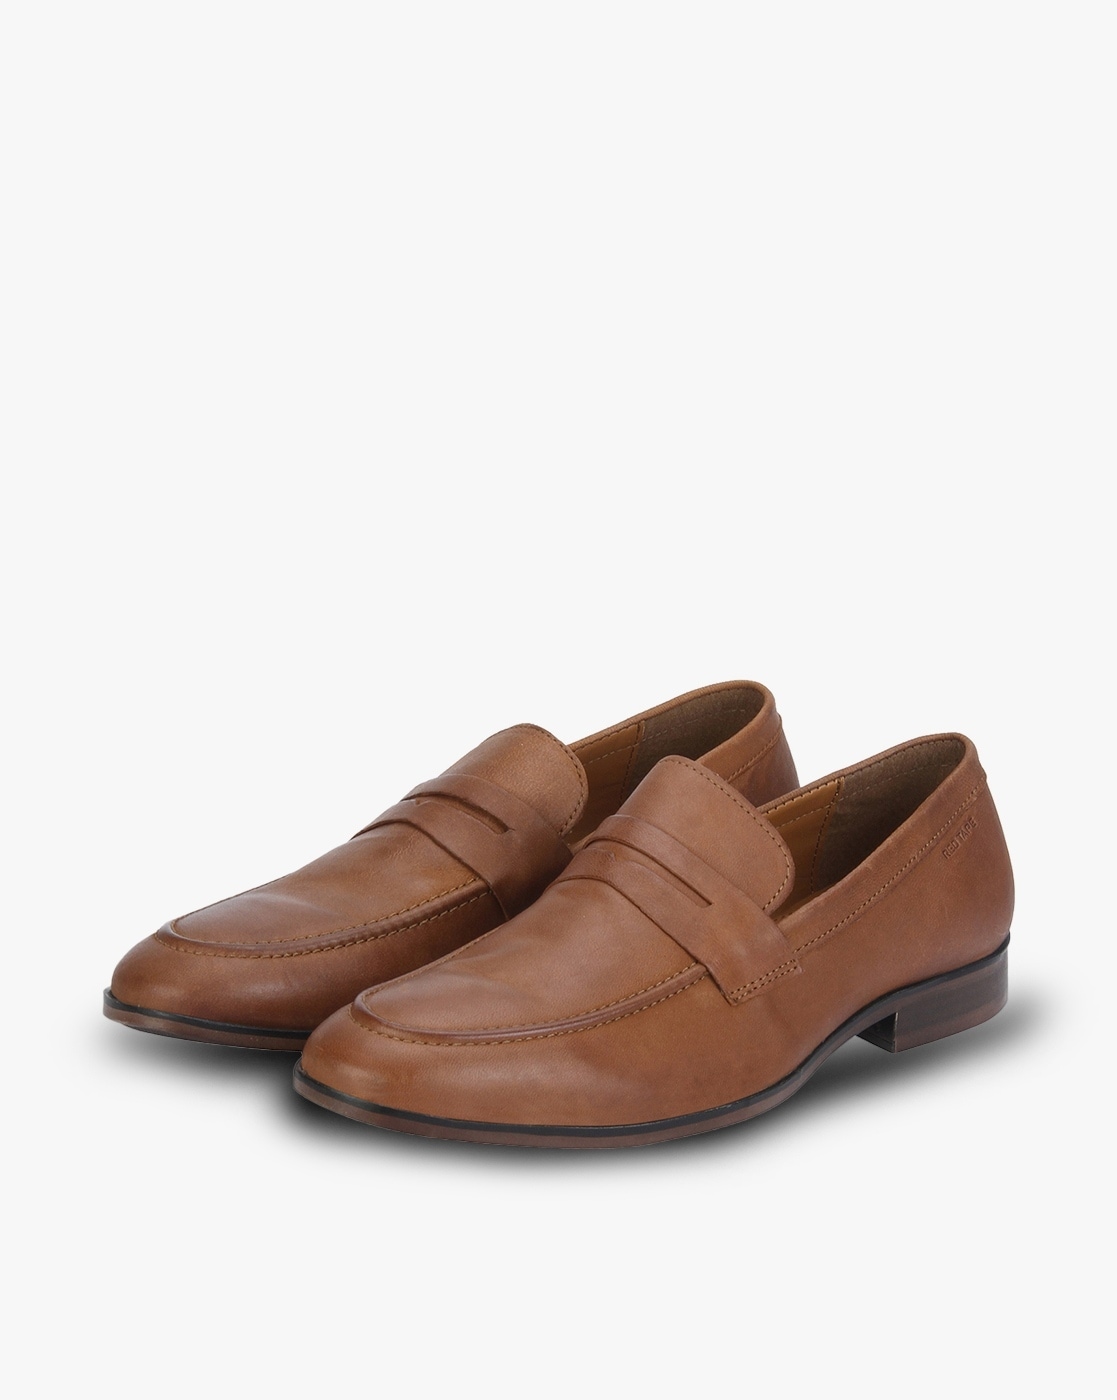 red tape men's slip on leather formal shoes